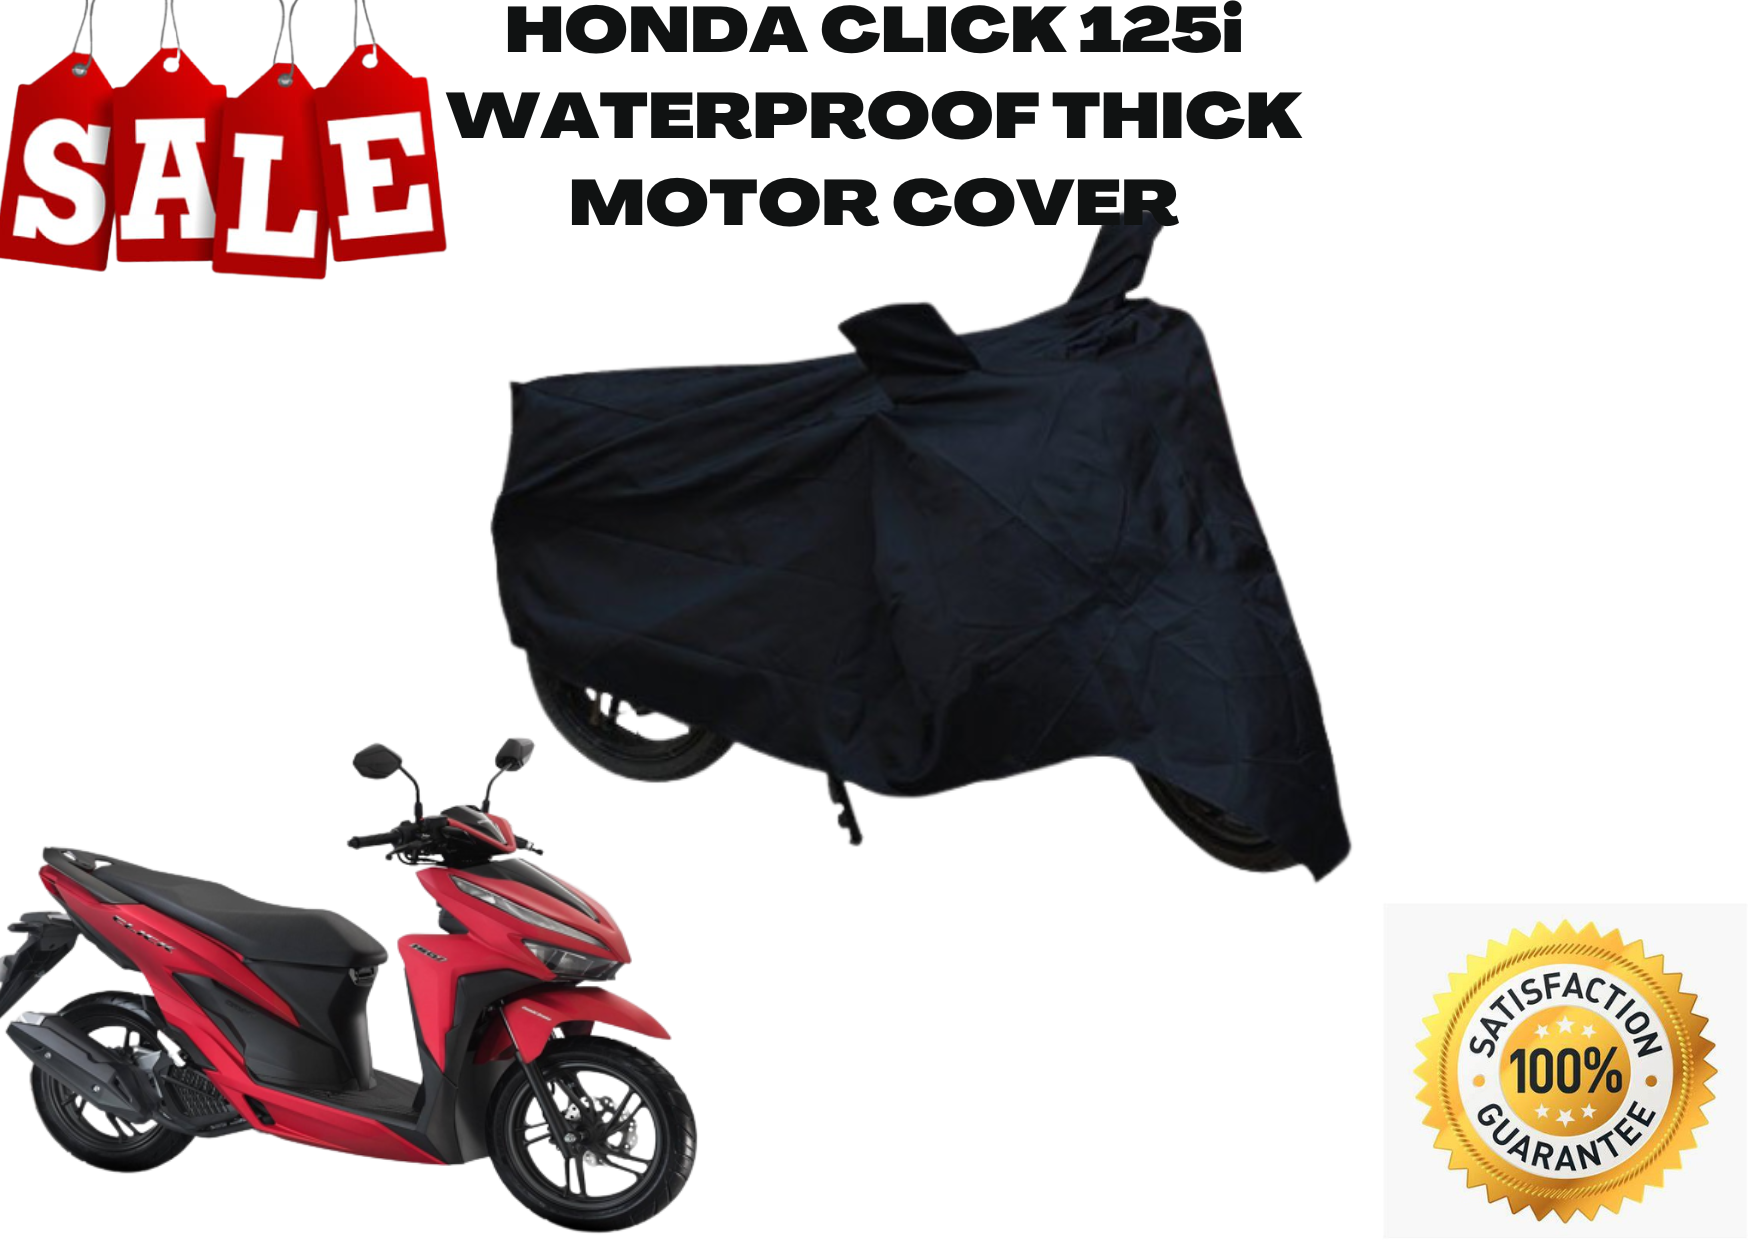 ACB THICK MOTOR COVER FOR HONDA CLICK 125i MOTORCYCLE COVER WATERPROOF ...